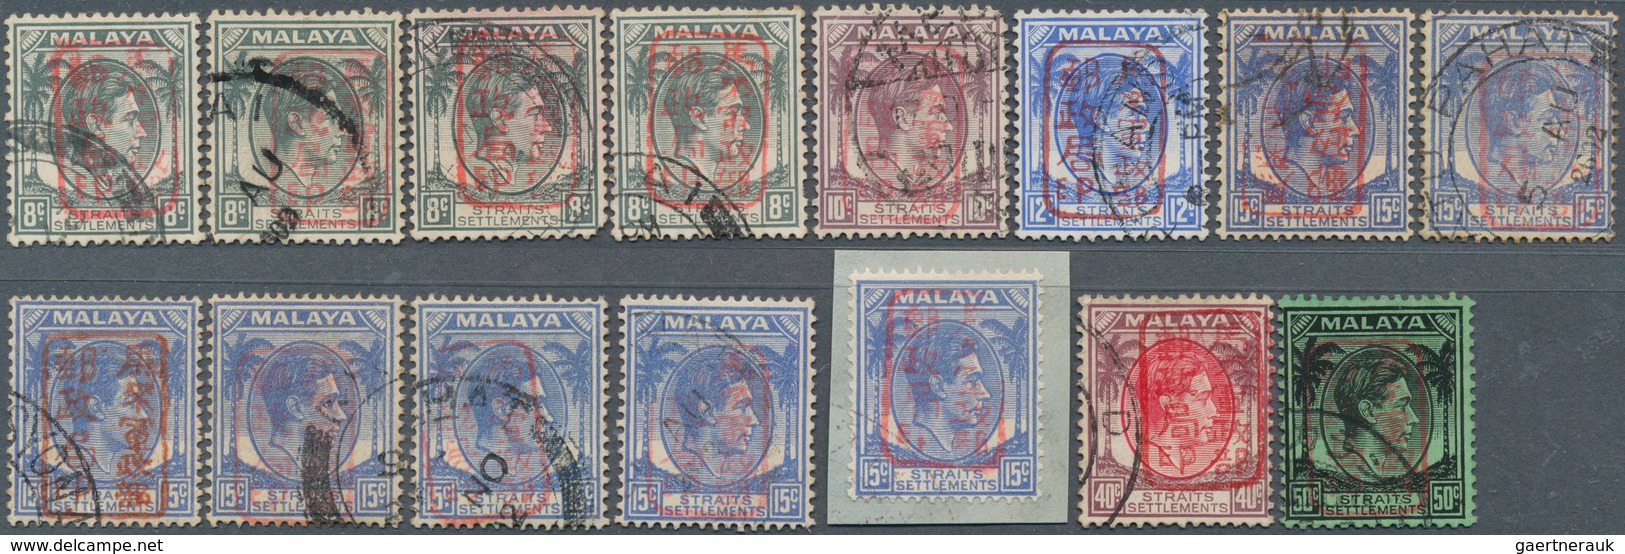 22951 Japanische Besetzung  WK II - Malaya: General Issues, Straits Settlements, 1942, Small Red Seal 1 C. - Malaysia (1964-...)